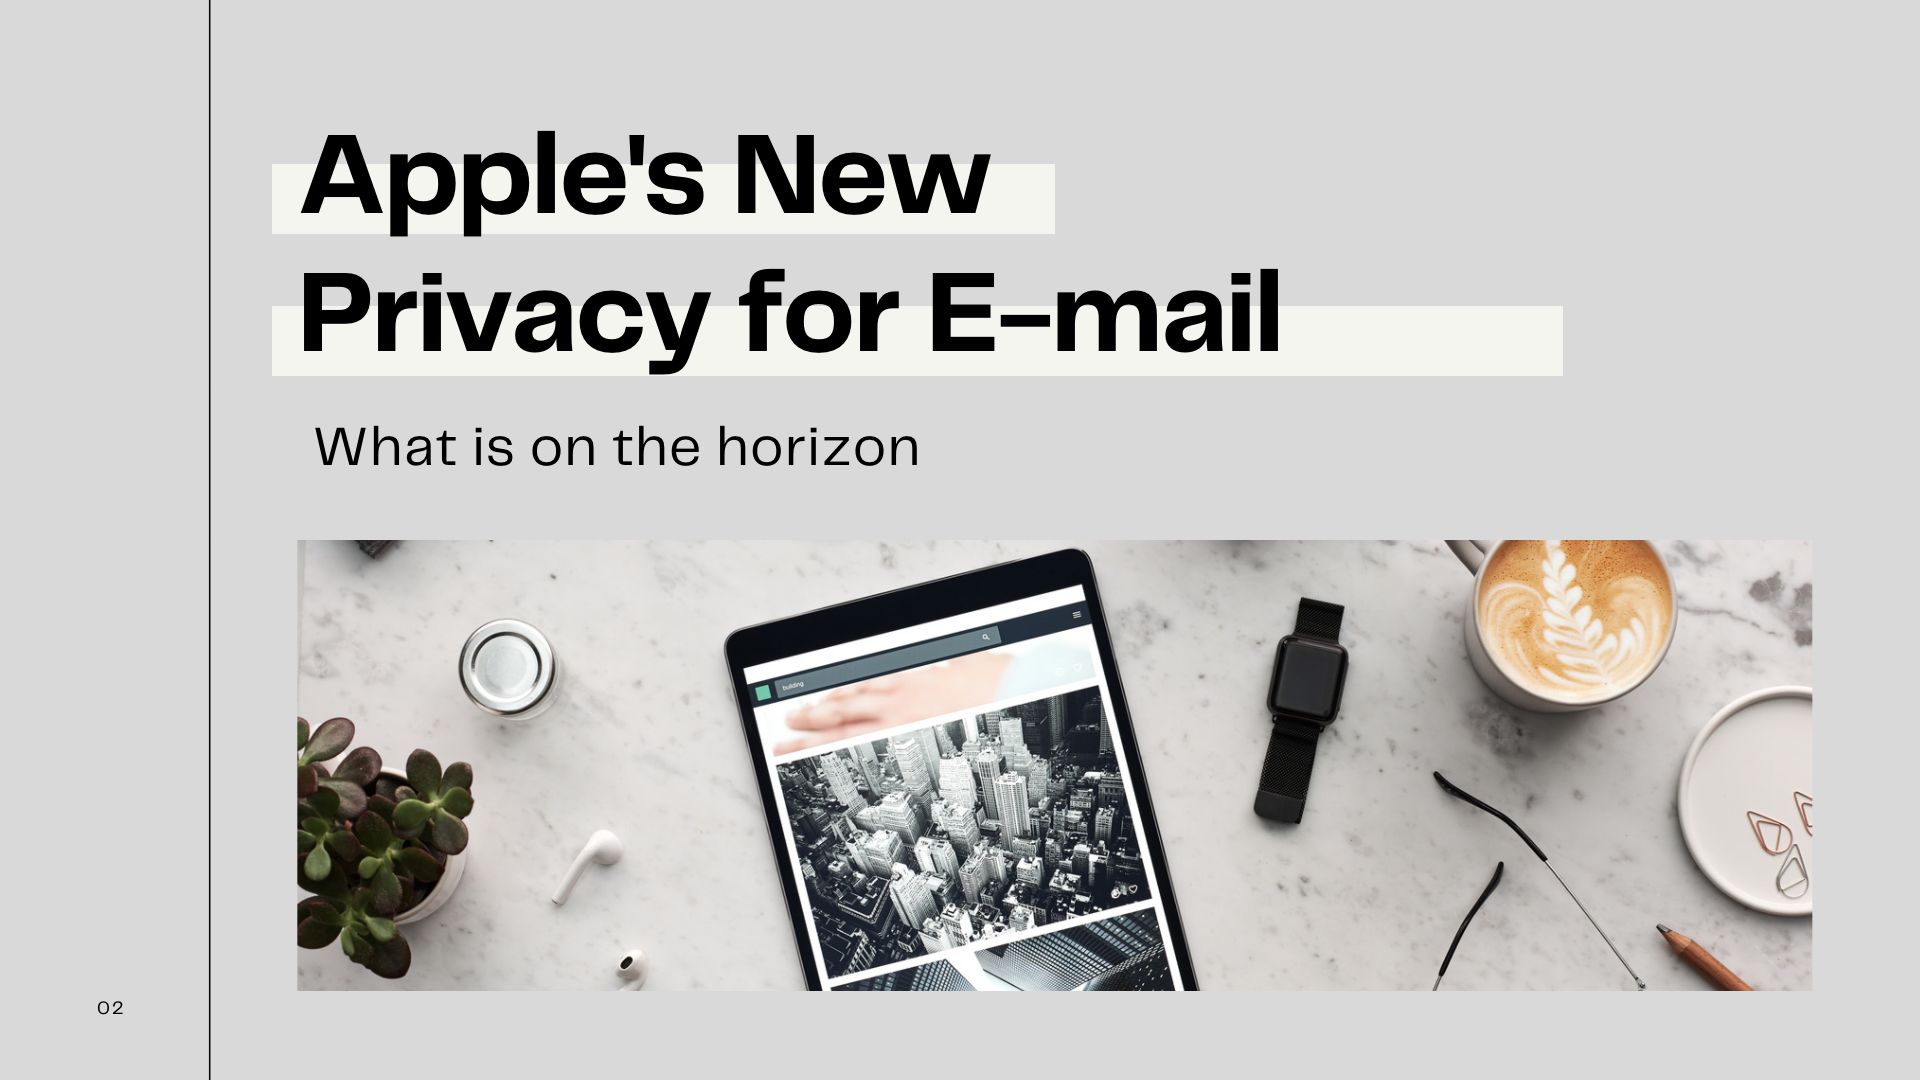 http://marketingelementsblog.com/2021/06/how-apples-privacy-will-affect-email-marketing/